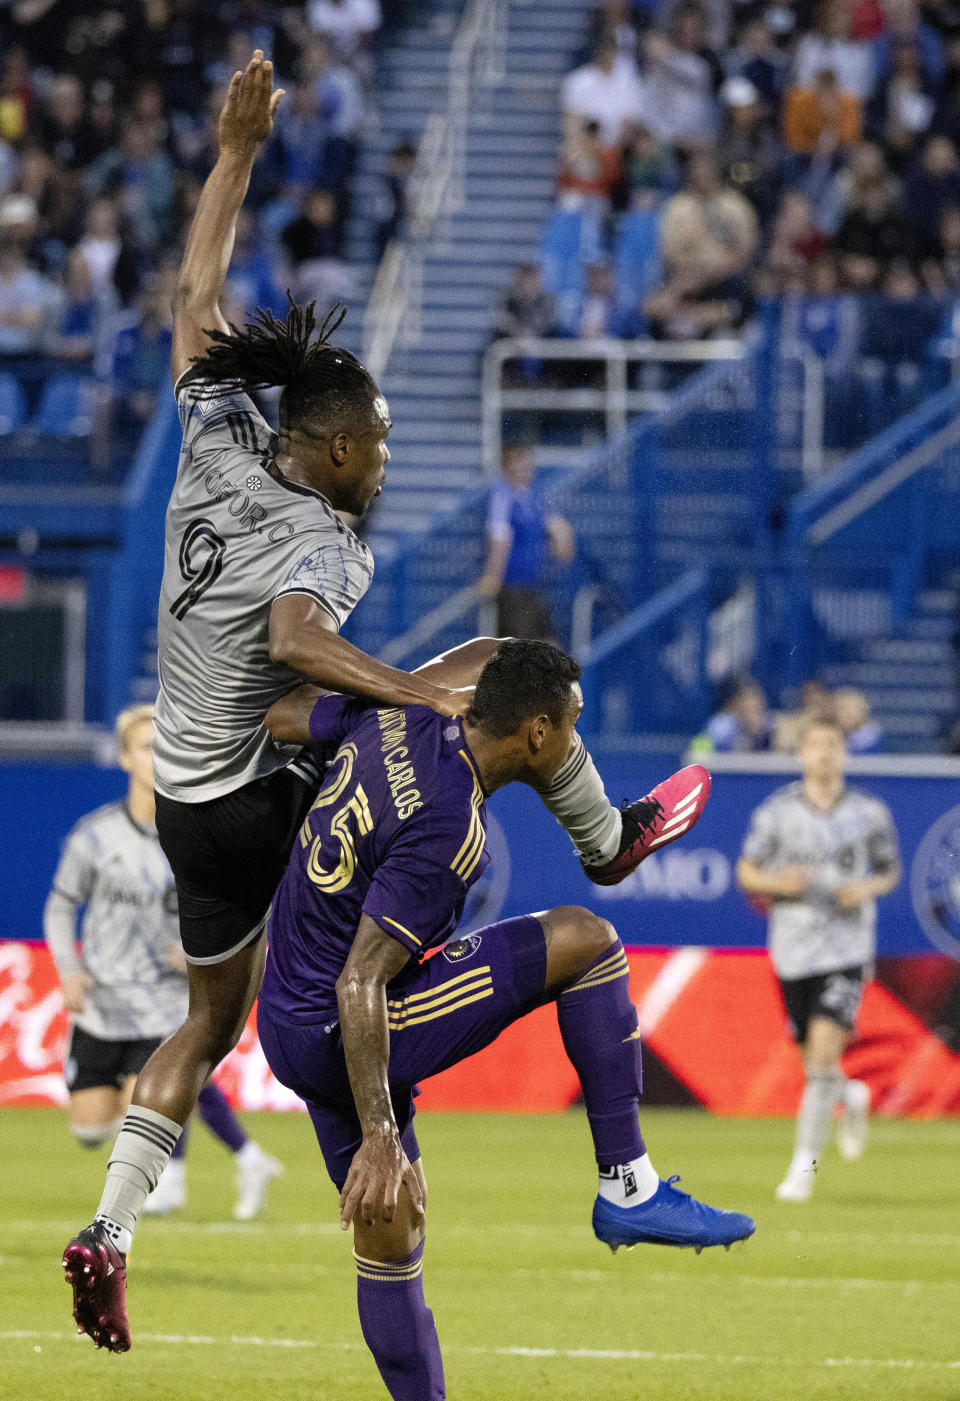 CF Montreal forward Chinonso Offor, left, and Orlando City defender Antonio Carlos collide after heading the ball during the first half of an MLS soccer game in Montreal, Saturday, May 6, 2023. (Allen McInnis/The Canadian Press via AP)